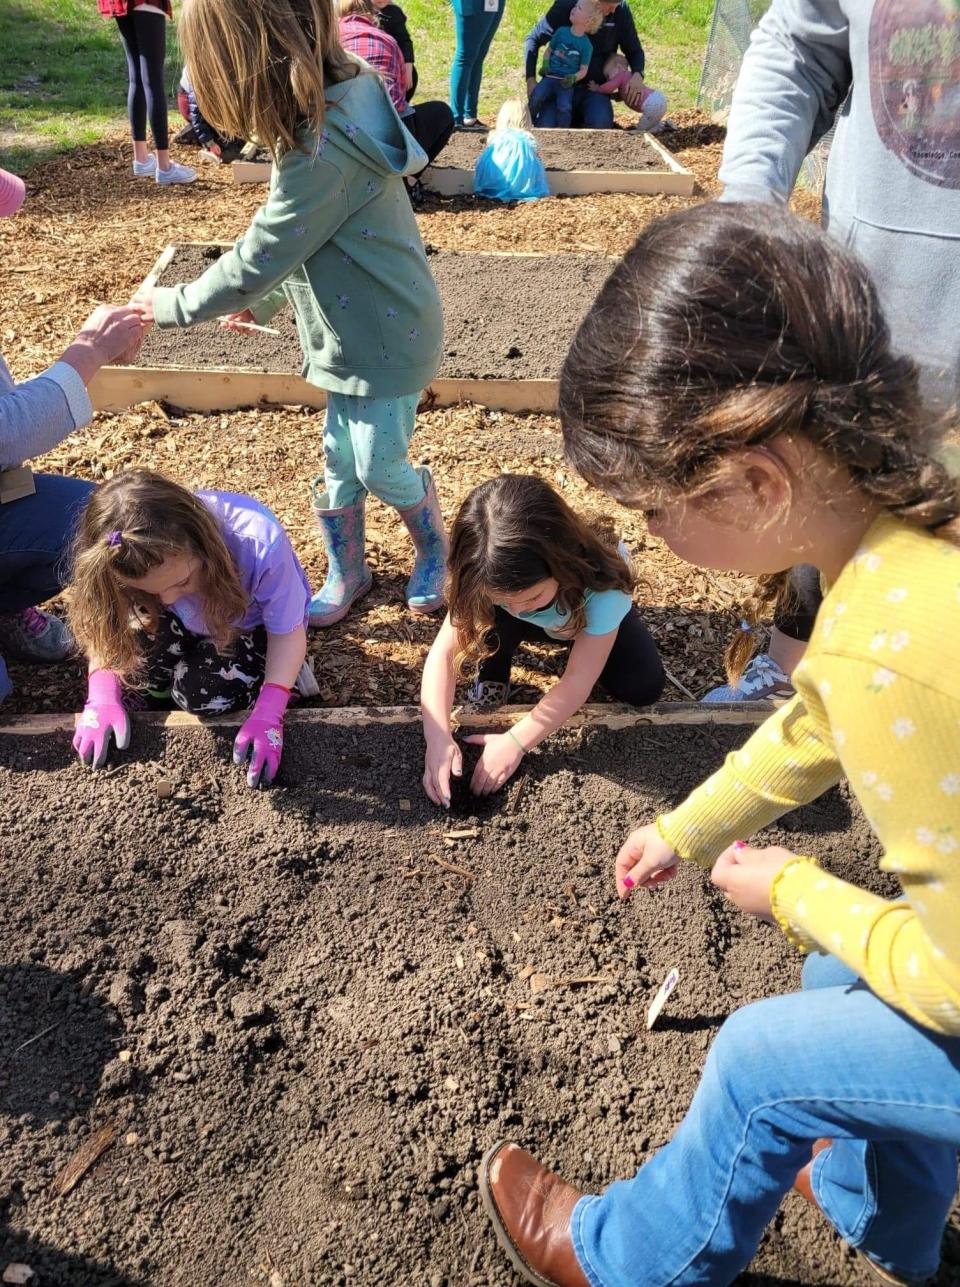 Children can learn practical life skills like gardening at ROOTS Youth Development in Georgetown.